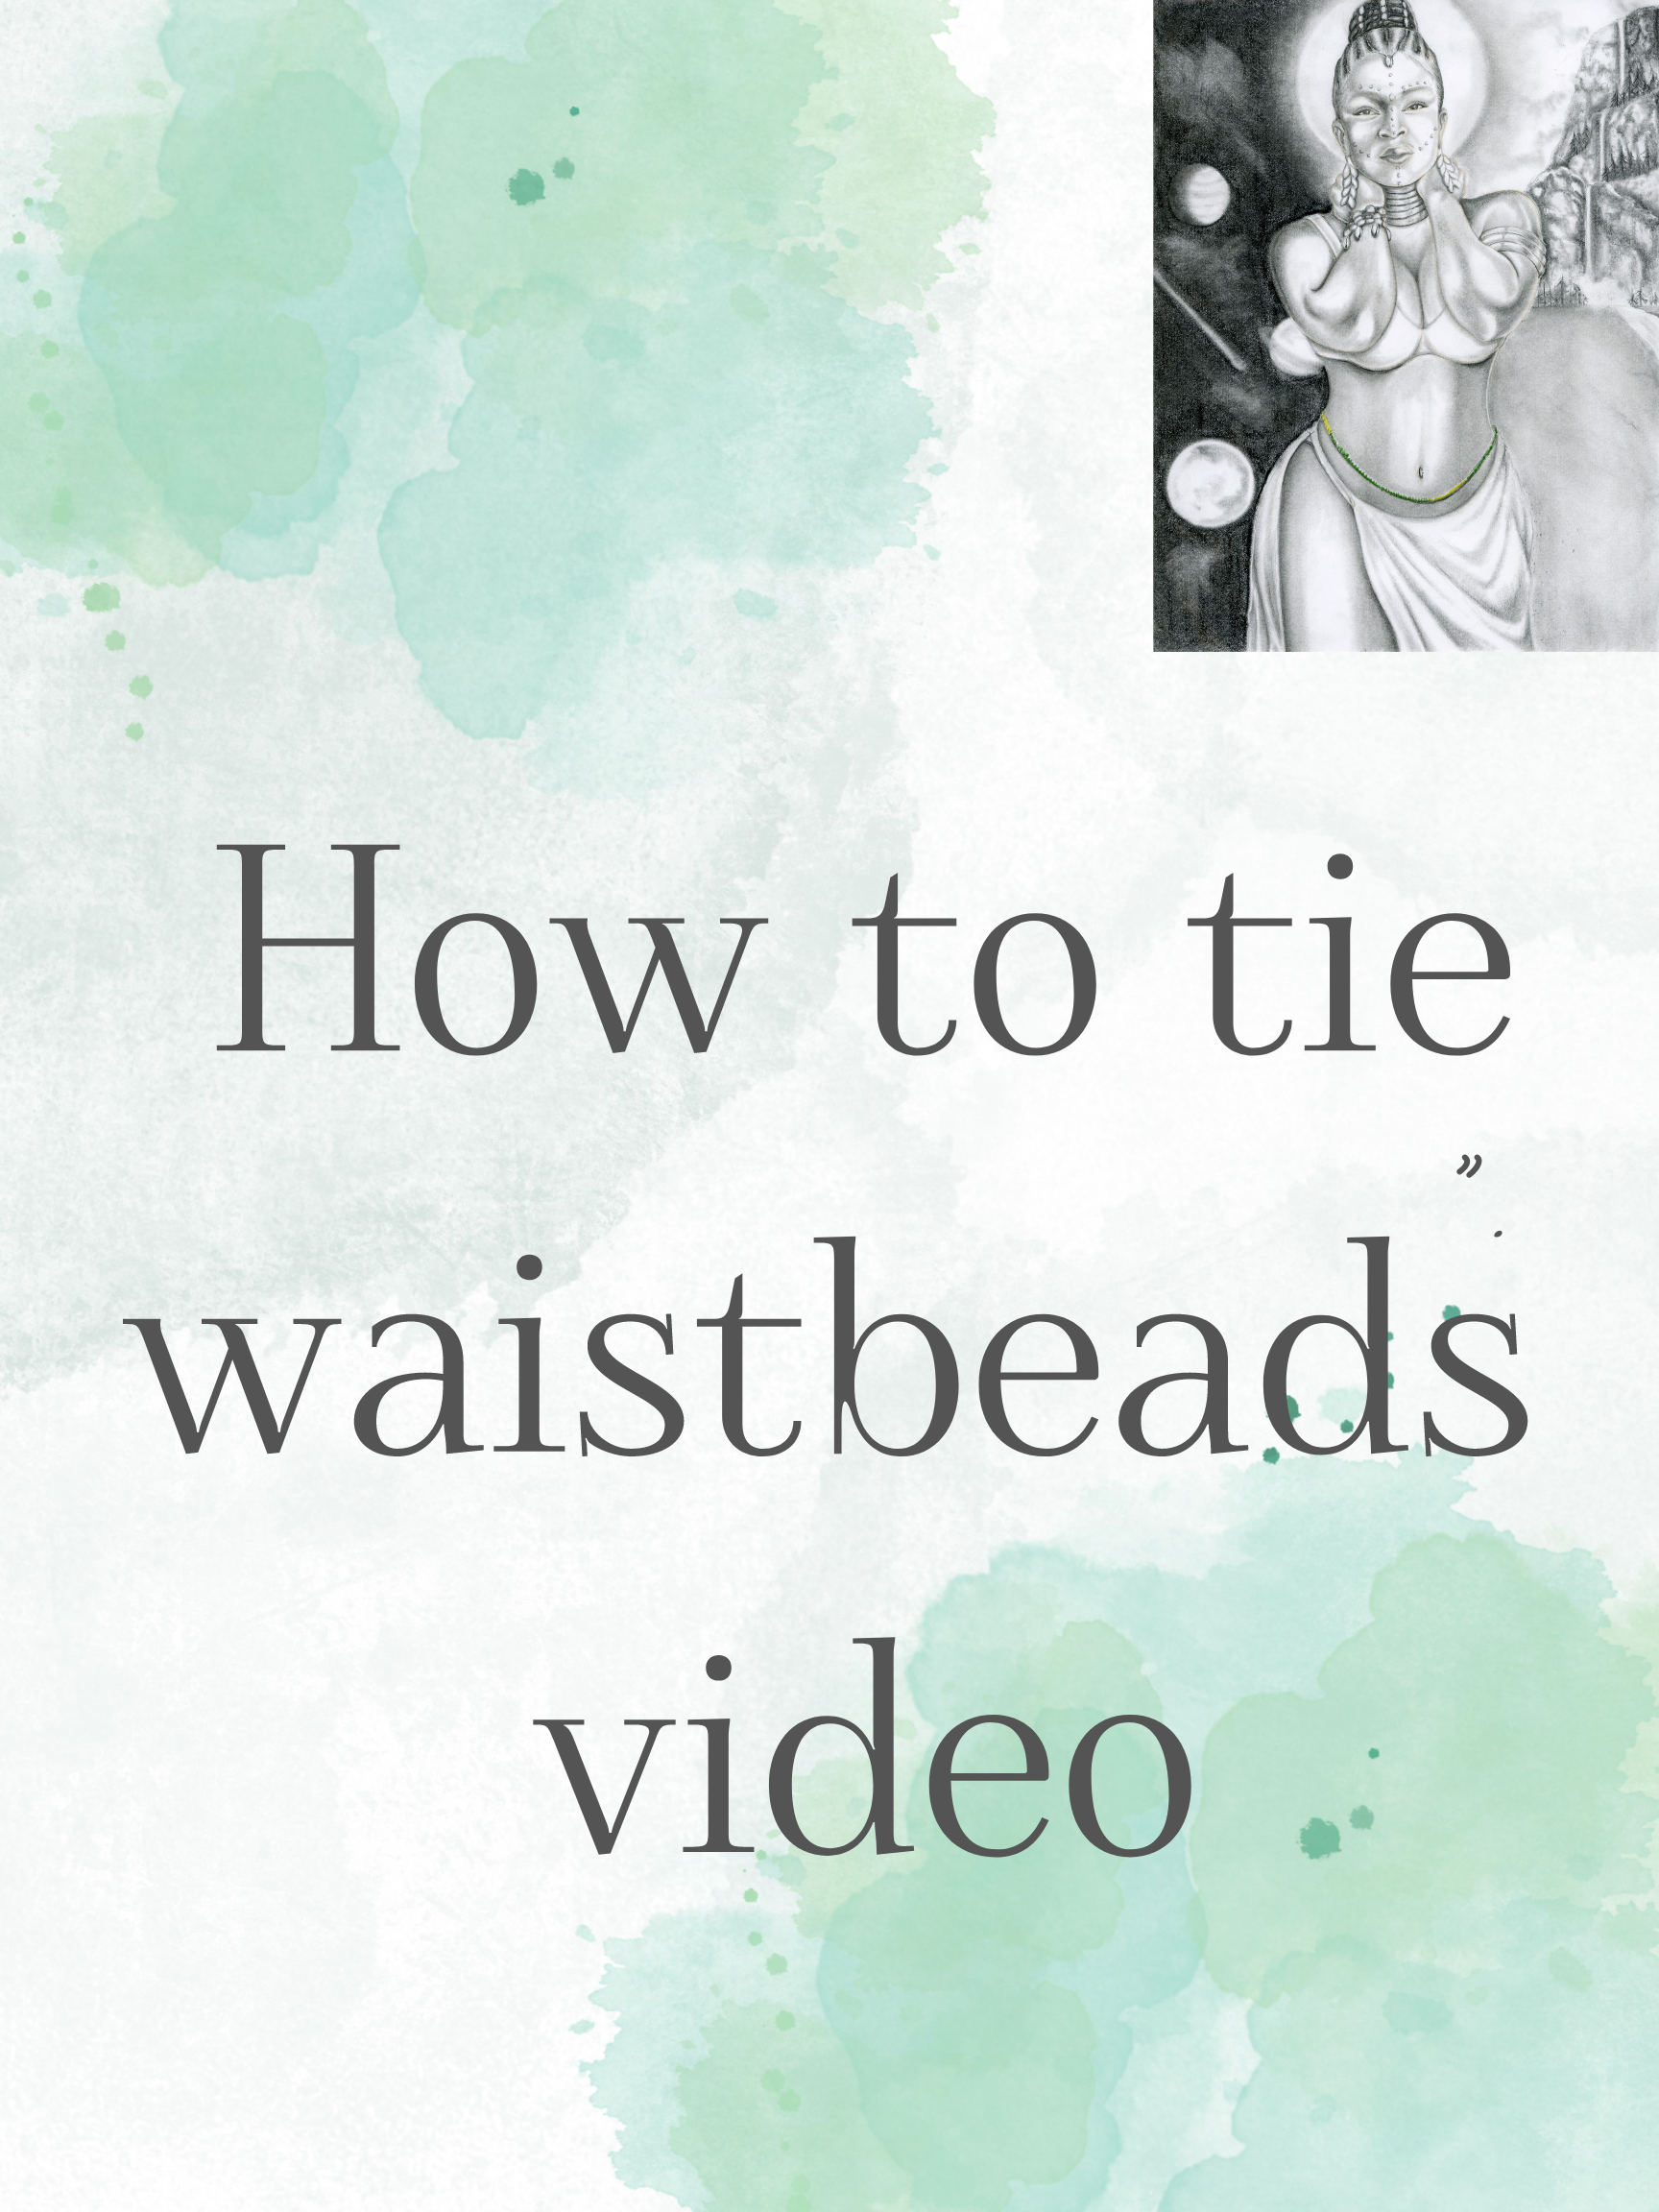 Load video: Video providing instructions on tying waistbeads.